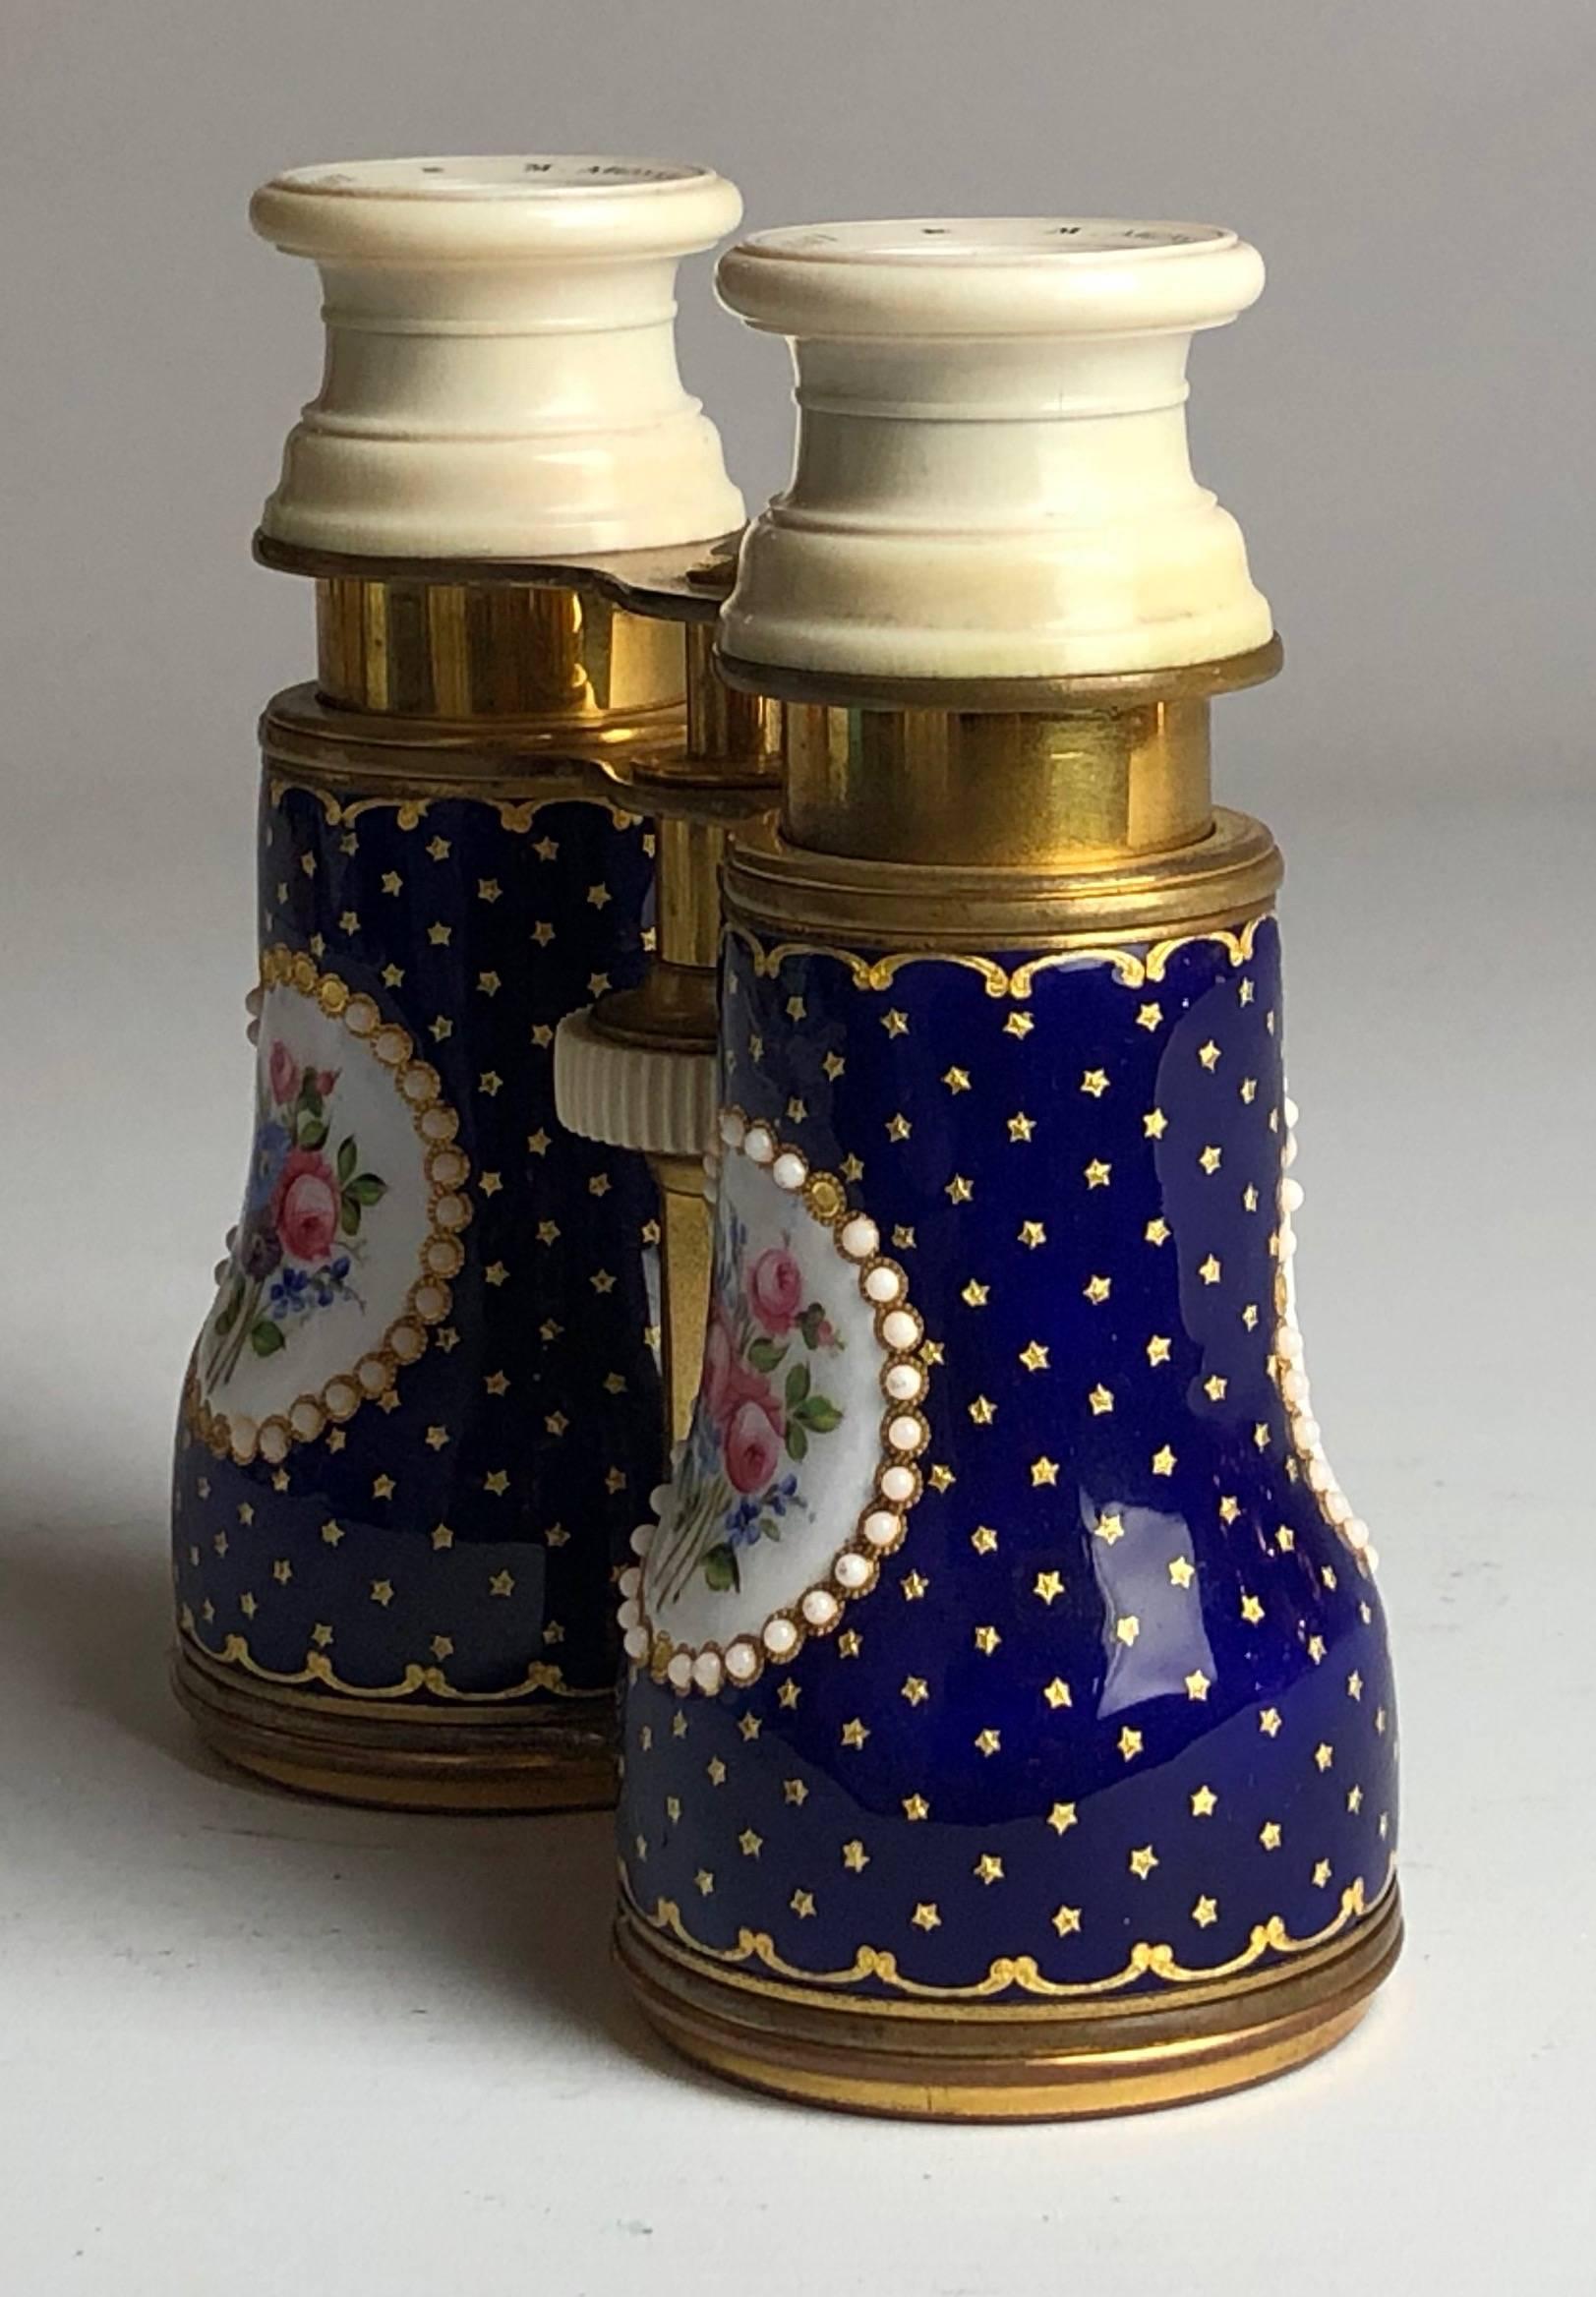 An excellent quality pair of ladies French enamel opera glasses,

France, circa 1890